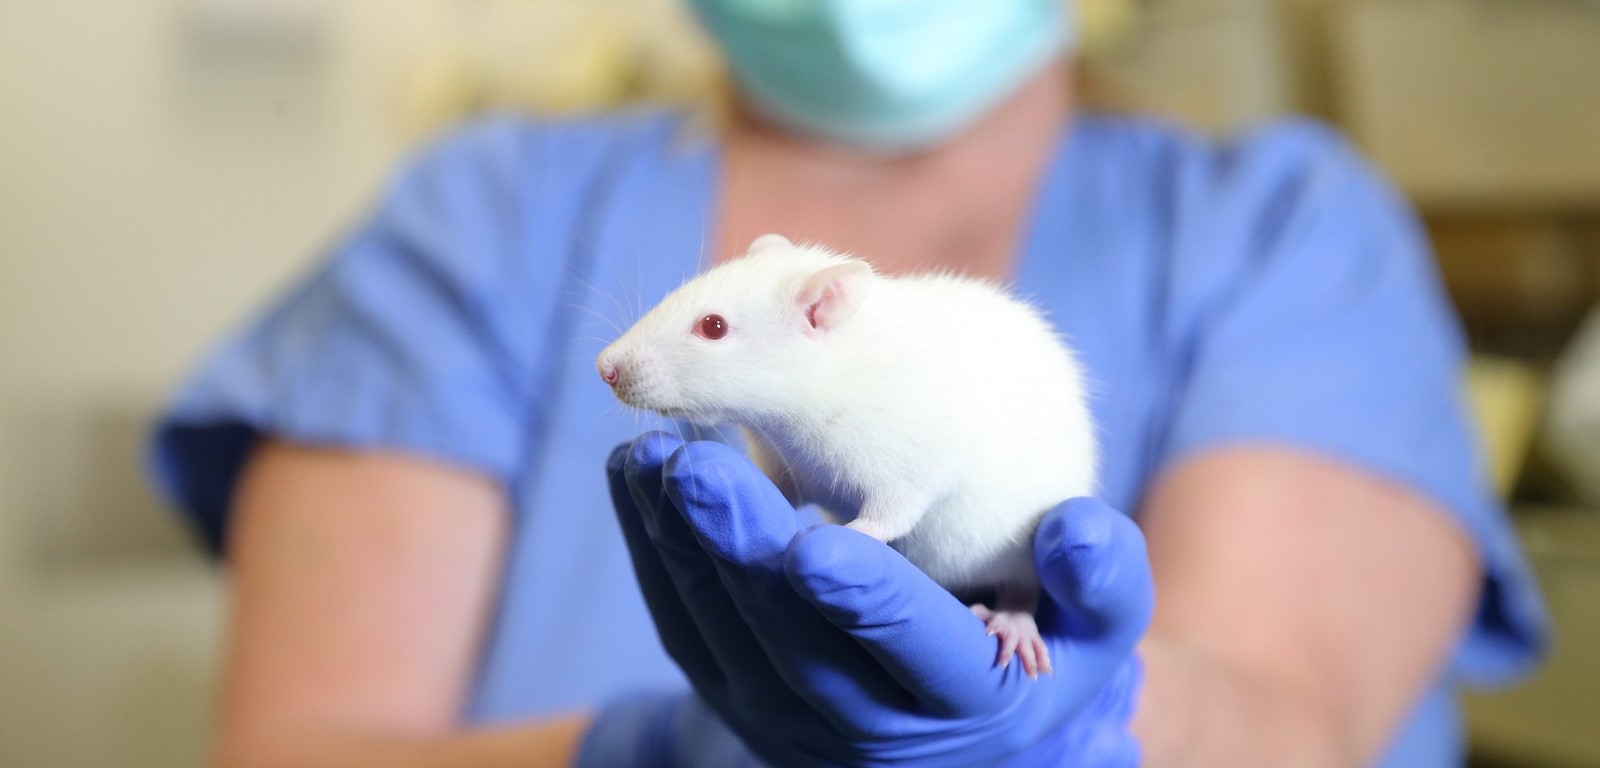 A white mouse resting on a scientist's gloved hand